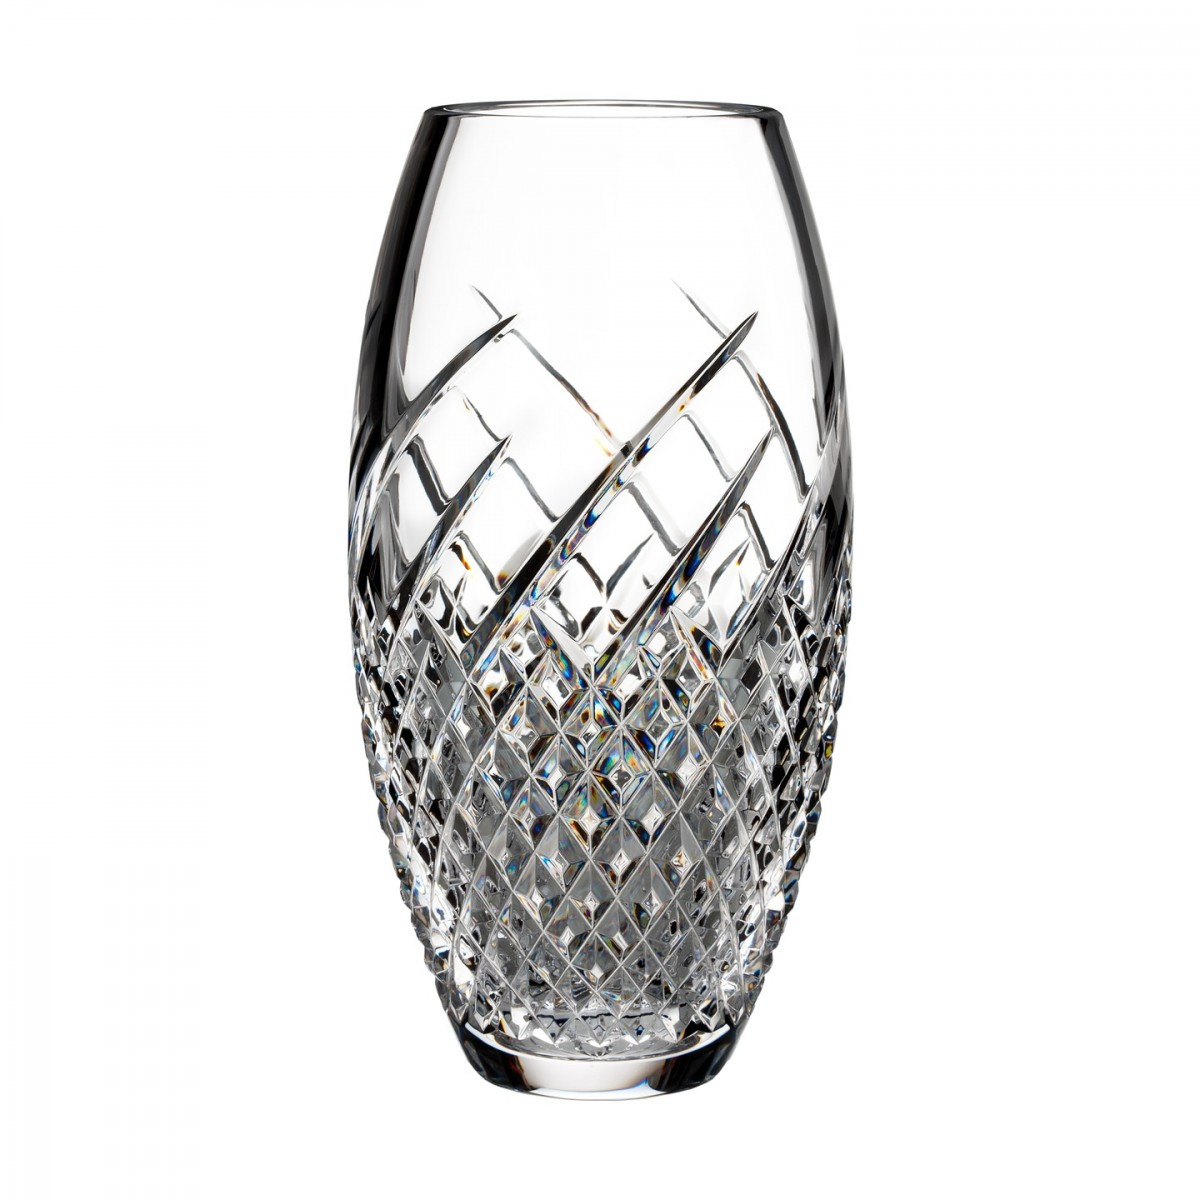 14 attractive Waterford Markham Vase 2024 free download waterford markham vase of wild atlantic way 10in vase house of waterford crystal us pertaining to wild atlantic way 10in vase